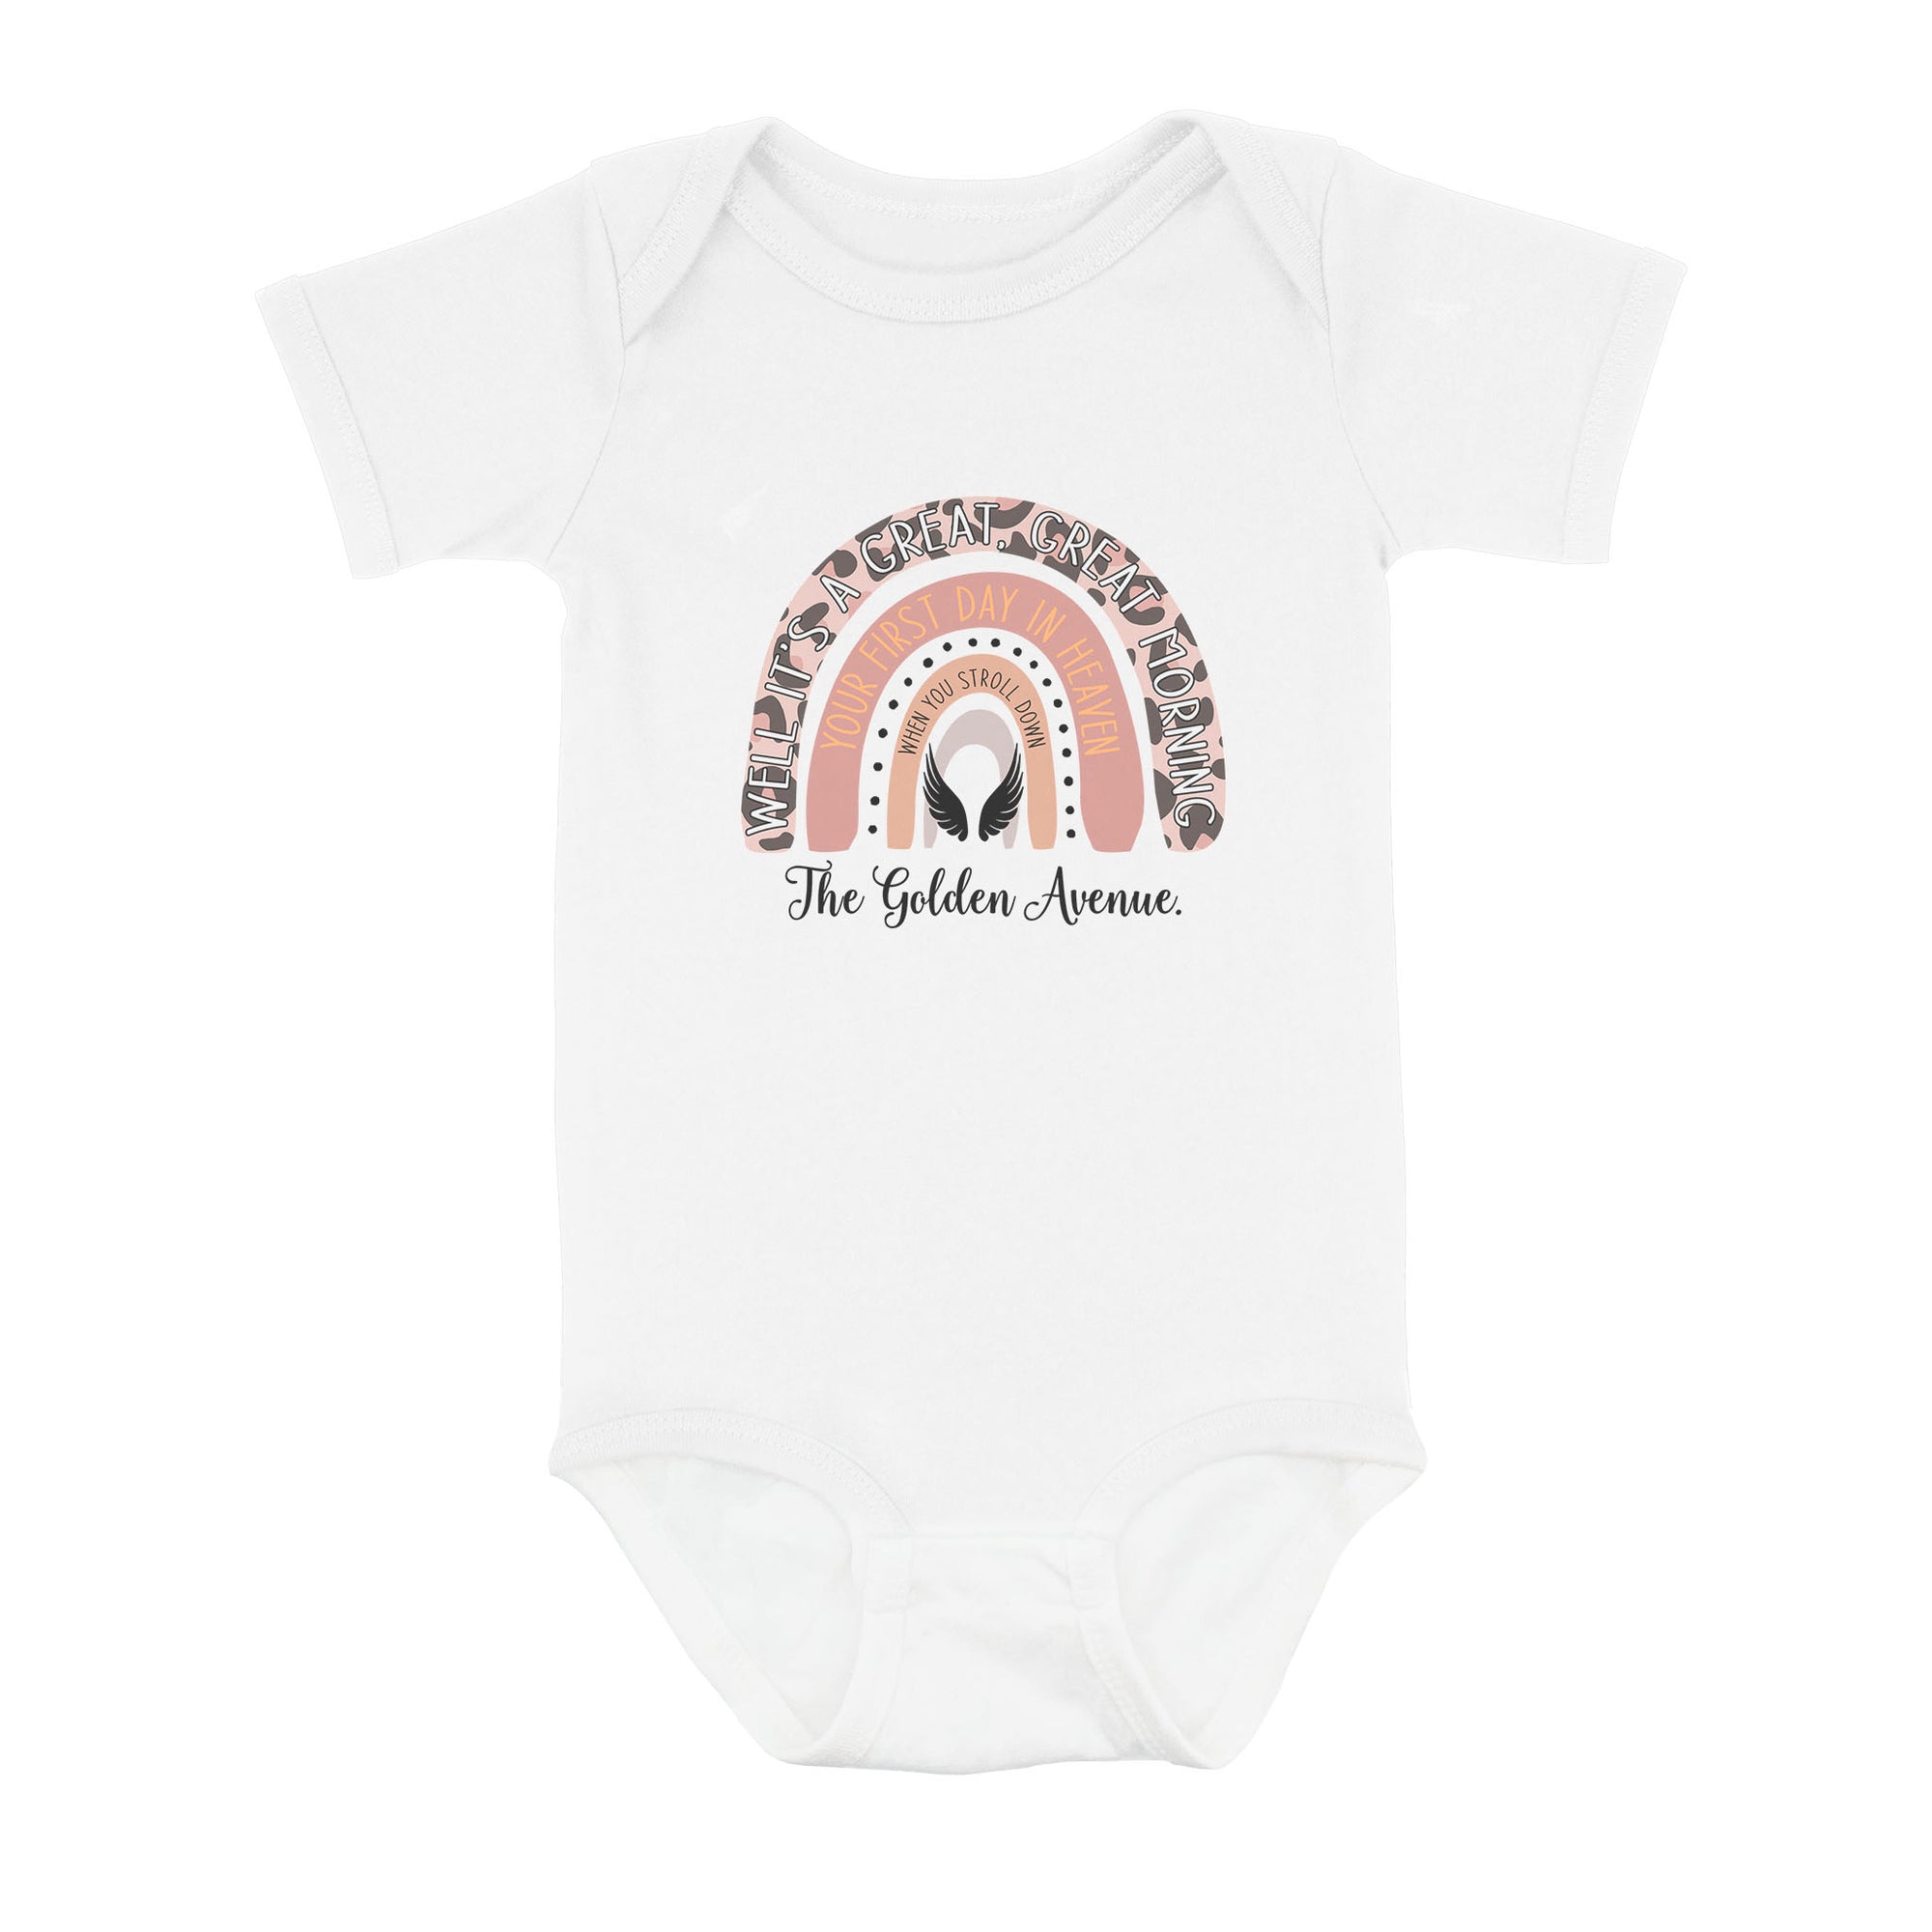 Your First Day In Heaven - Baby Onesie